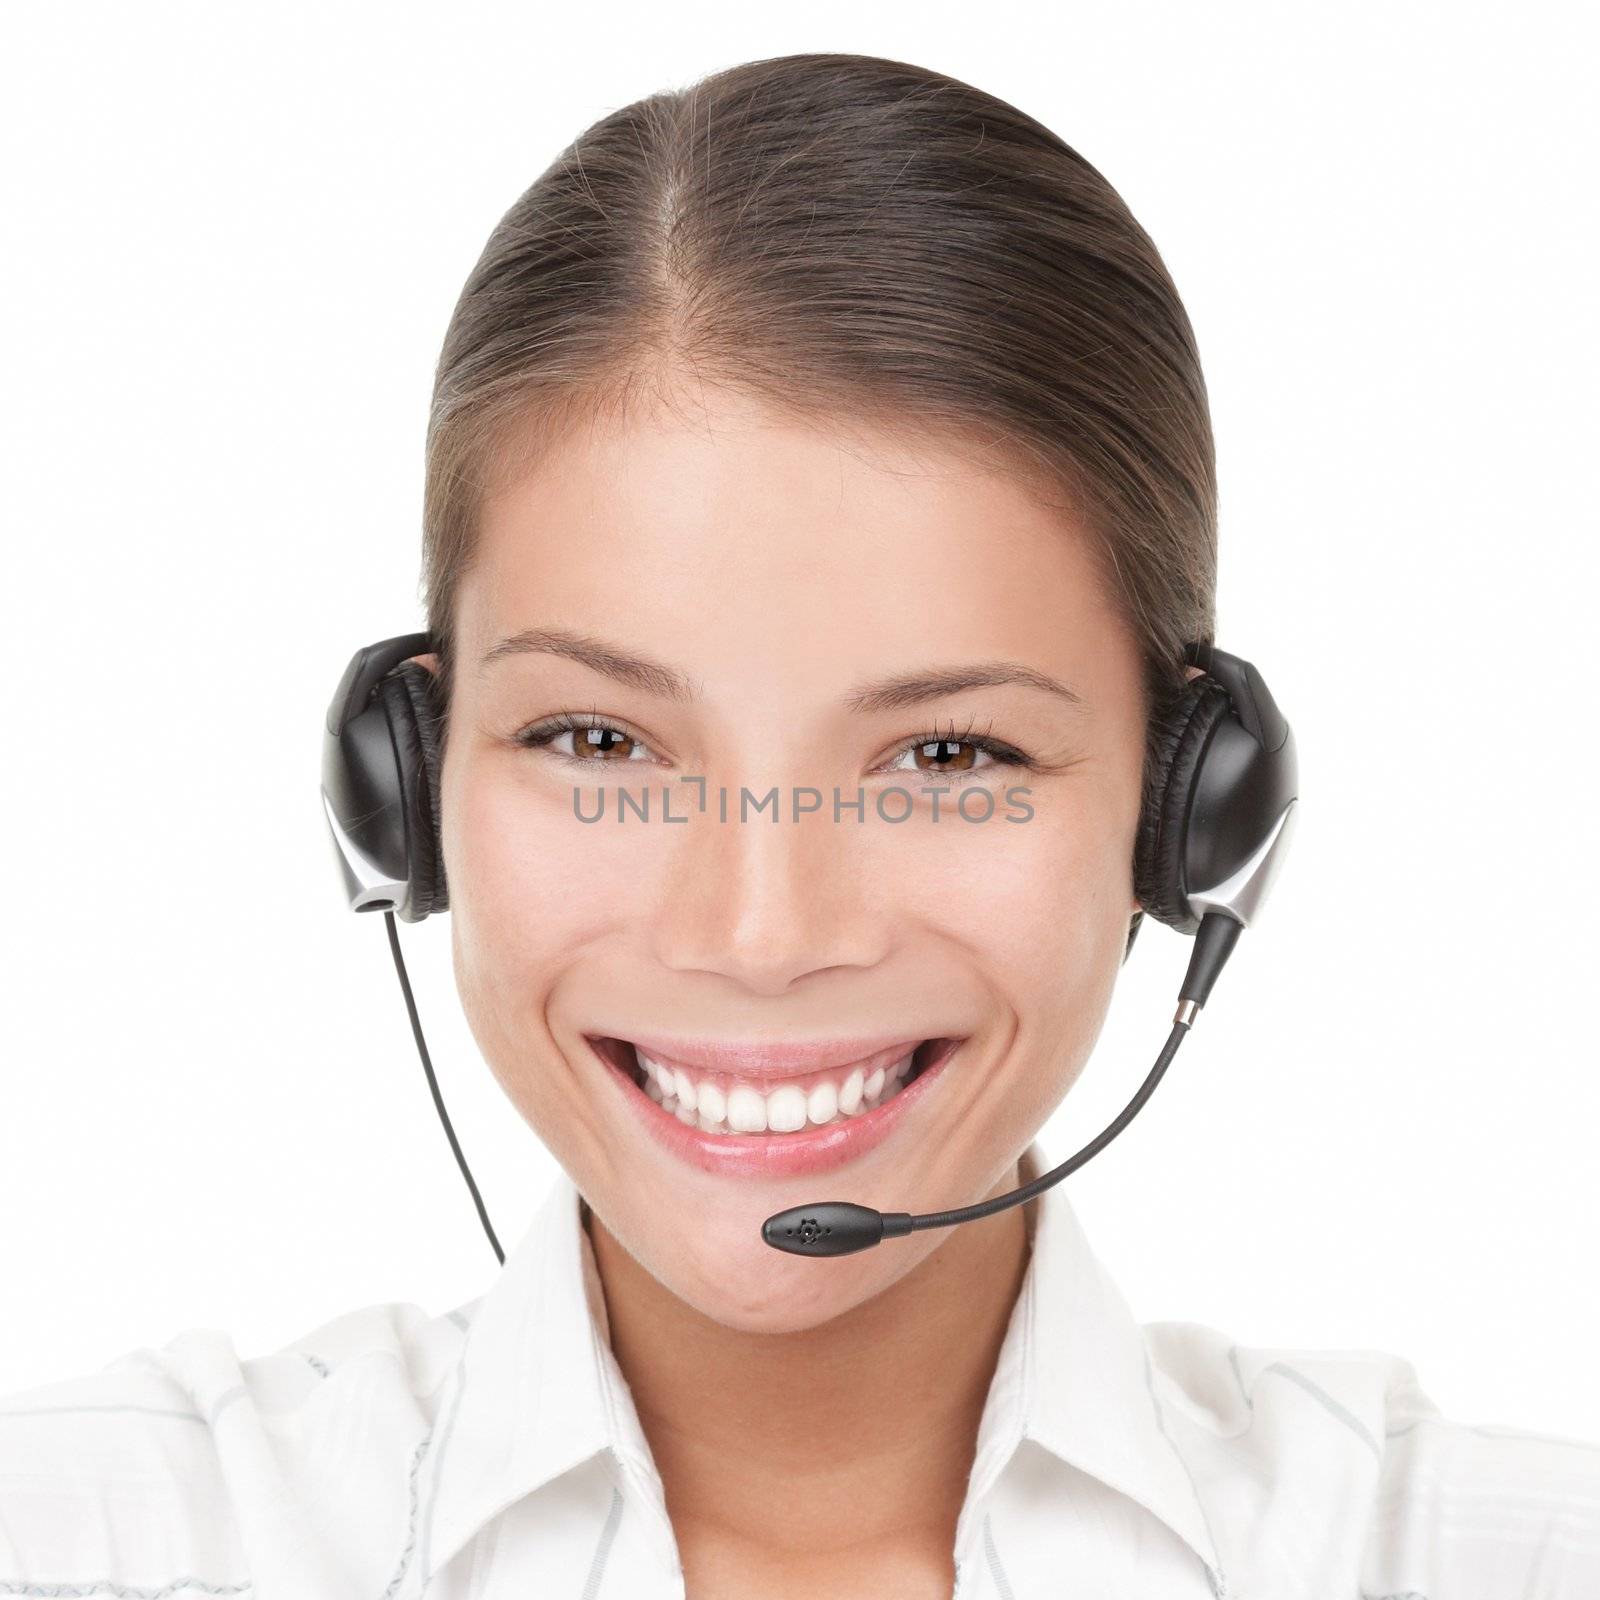 Headset woman from call center. Portrait close-up of young smiling woman from call center wearing headset. Isolated on white background. Mixed Asian / Caucasian woman